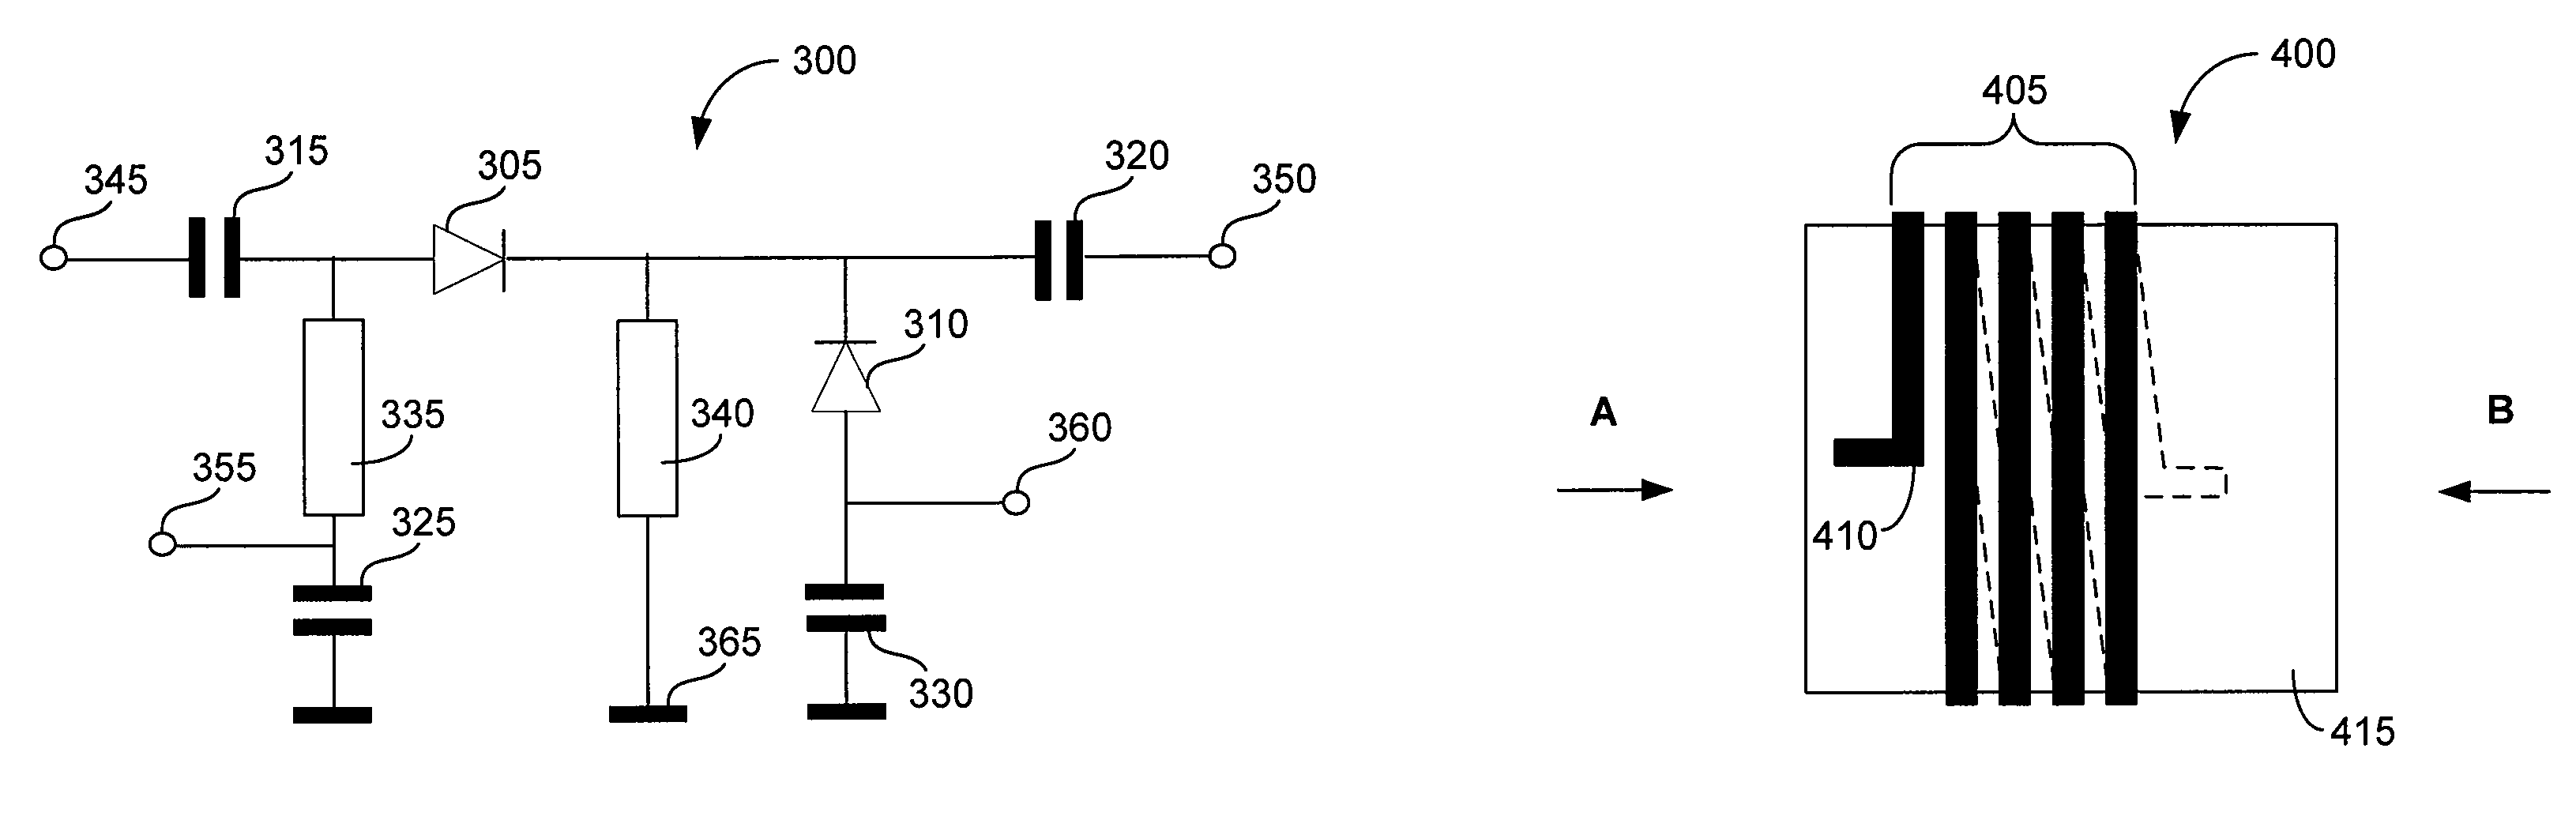 High-power PIN diode switch